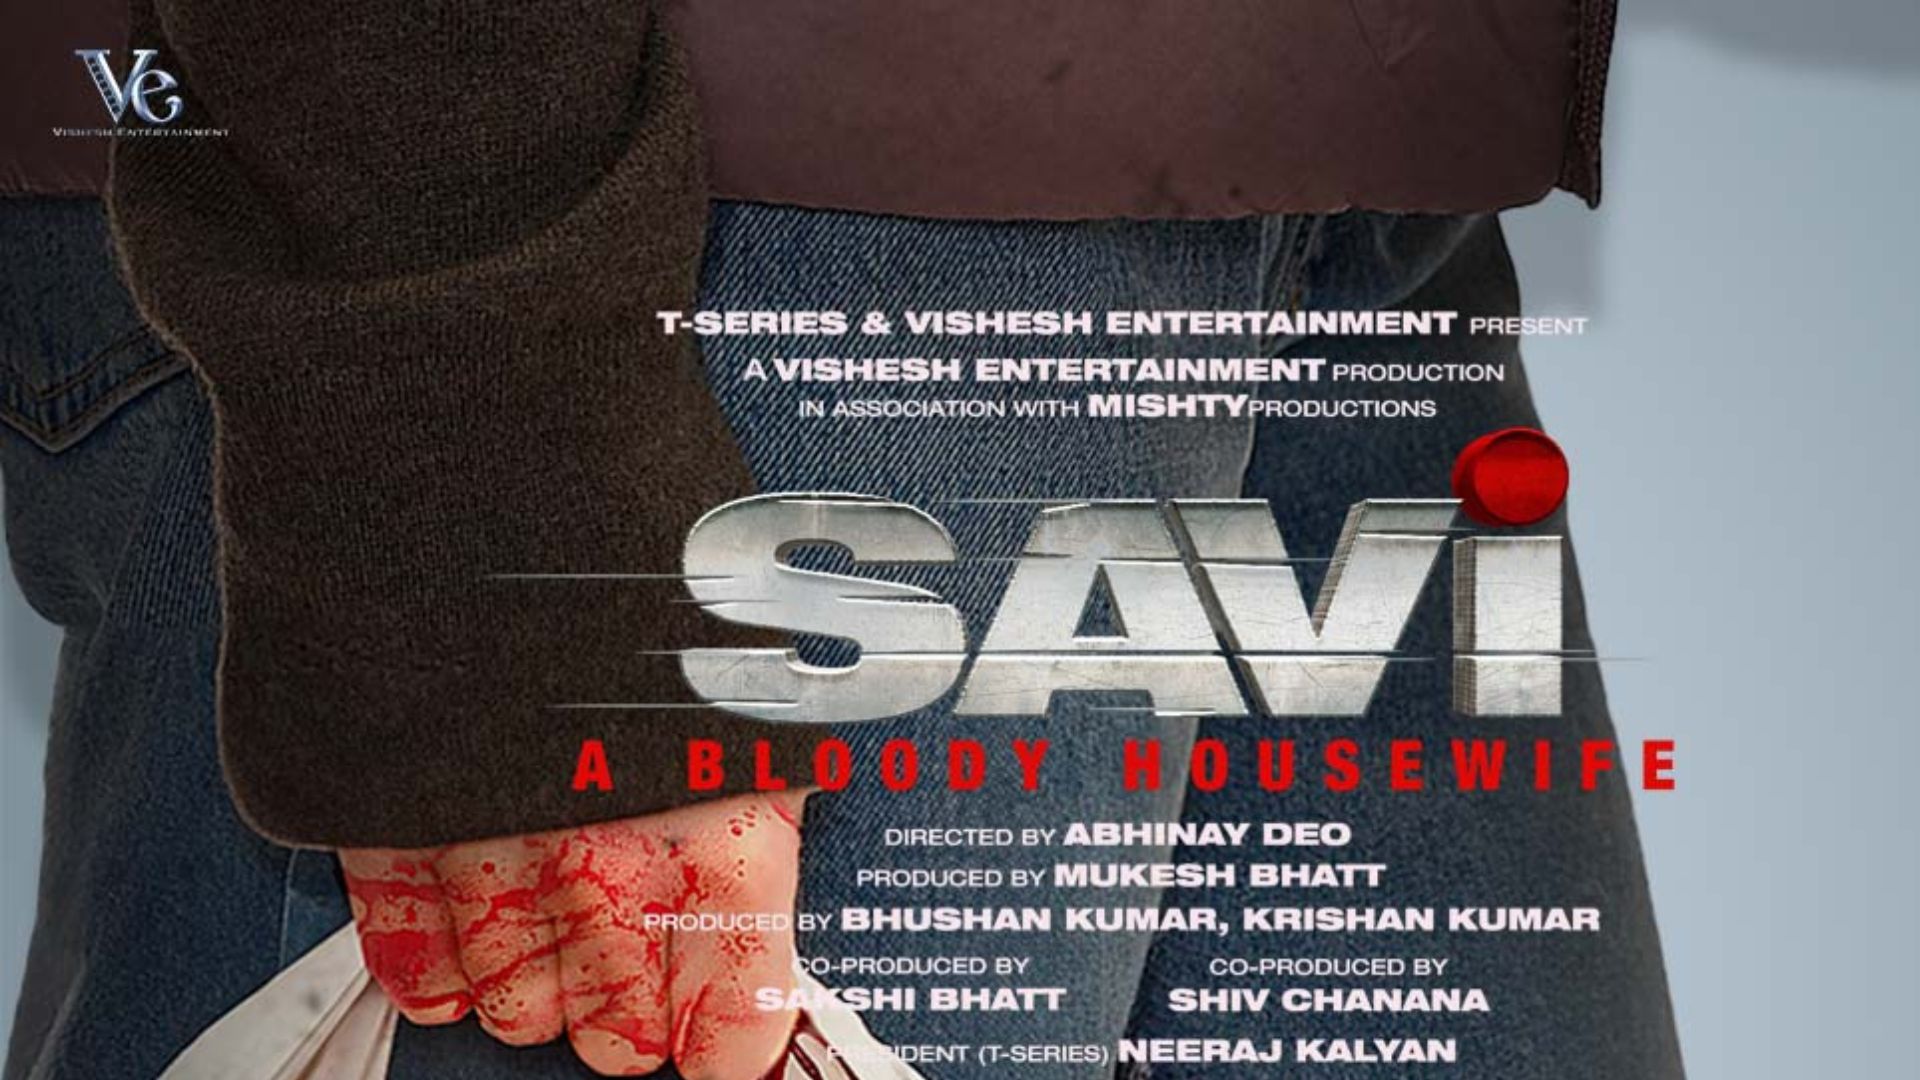 The suspense surrounding Divya Khosla's 'Savi: A Bloody Housewife' has been further heightened by the teaser directed by Abhinay Deo.